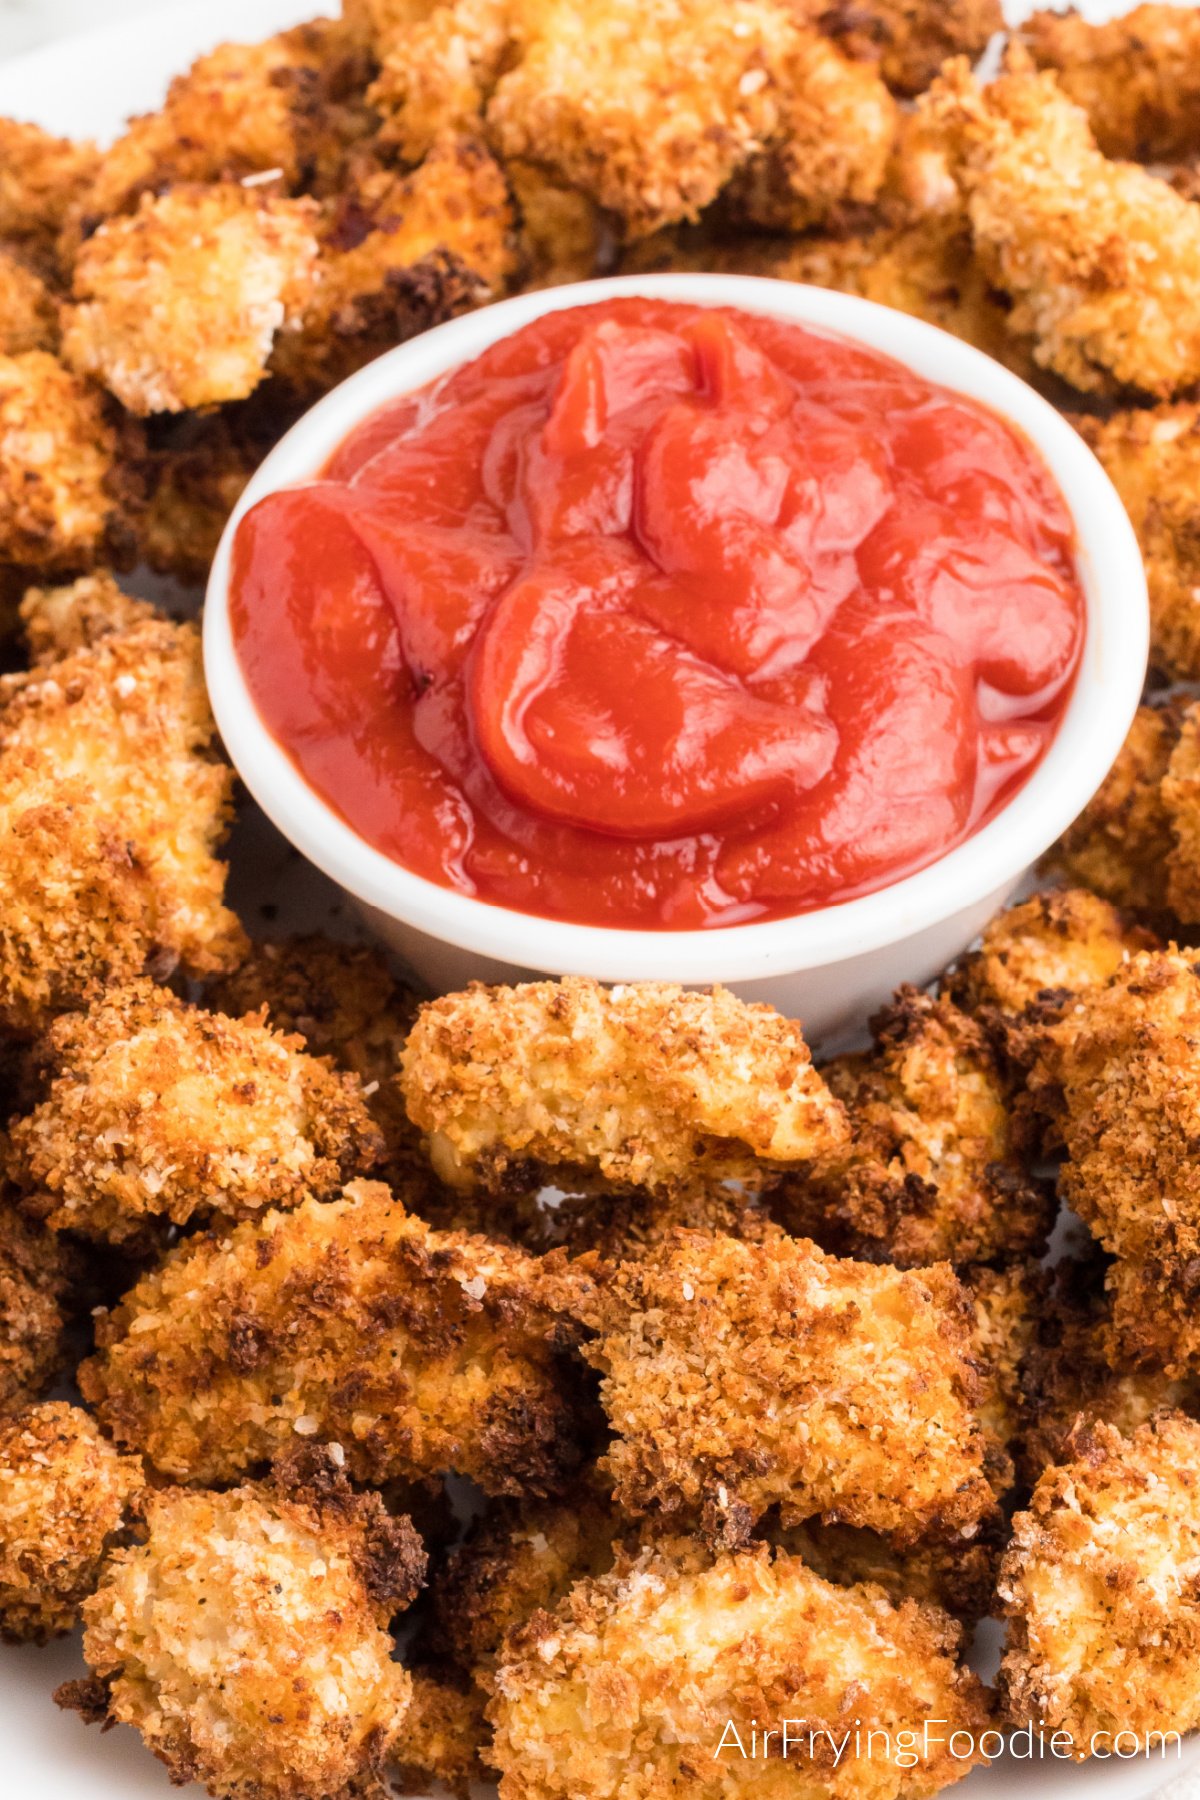 Homemade popcorn chicken made in the air fryer, on a serving tray with a side of ketchup.